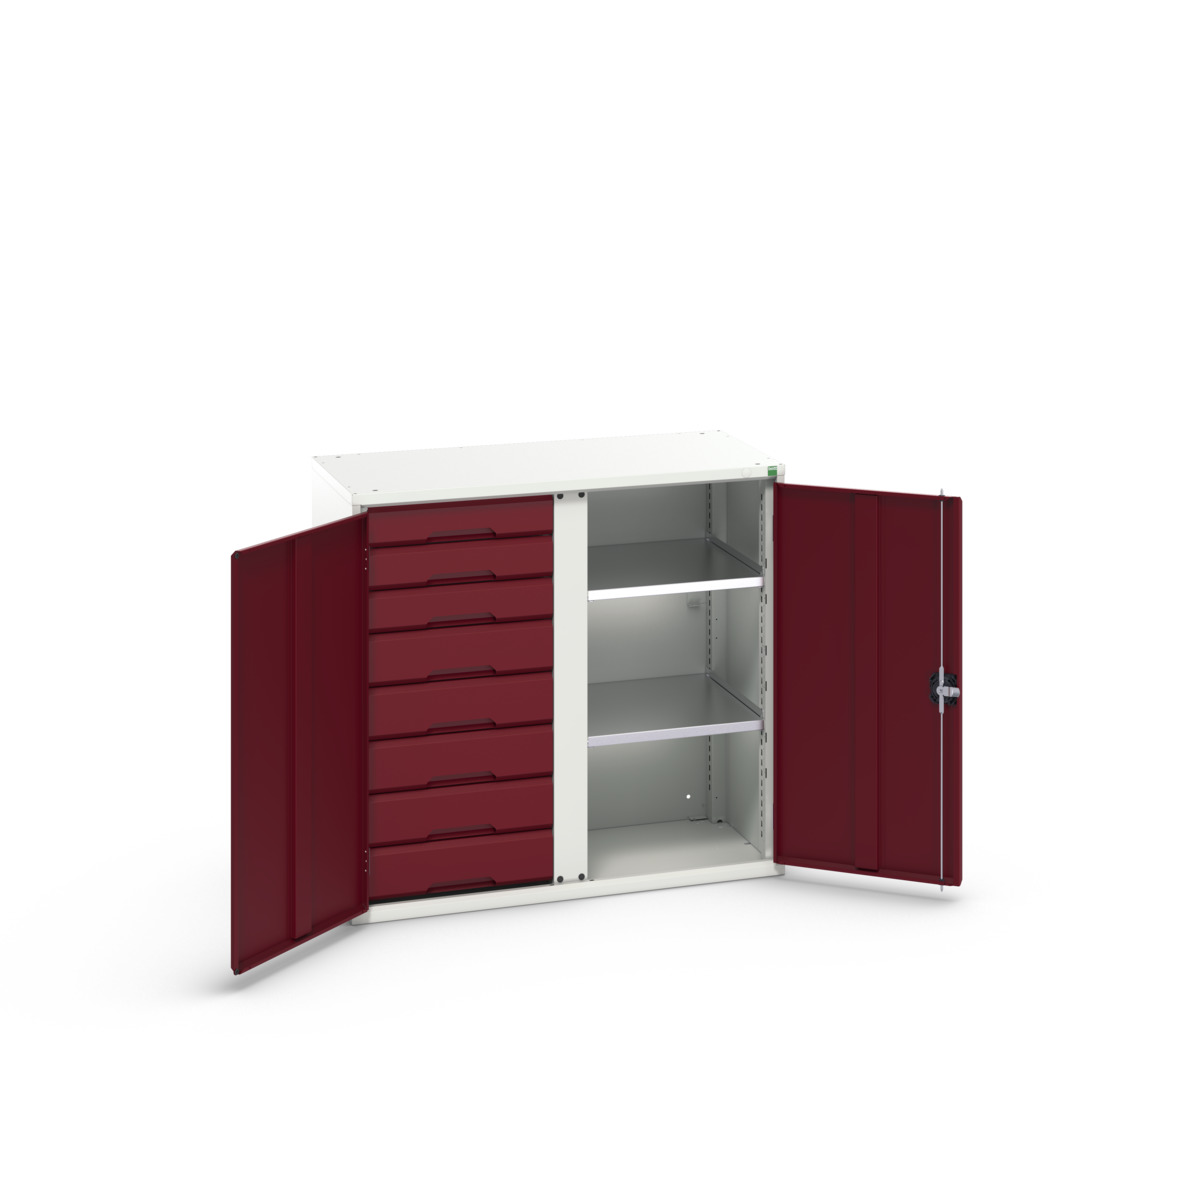 16926558.24 - verso kitted cupboard